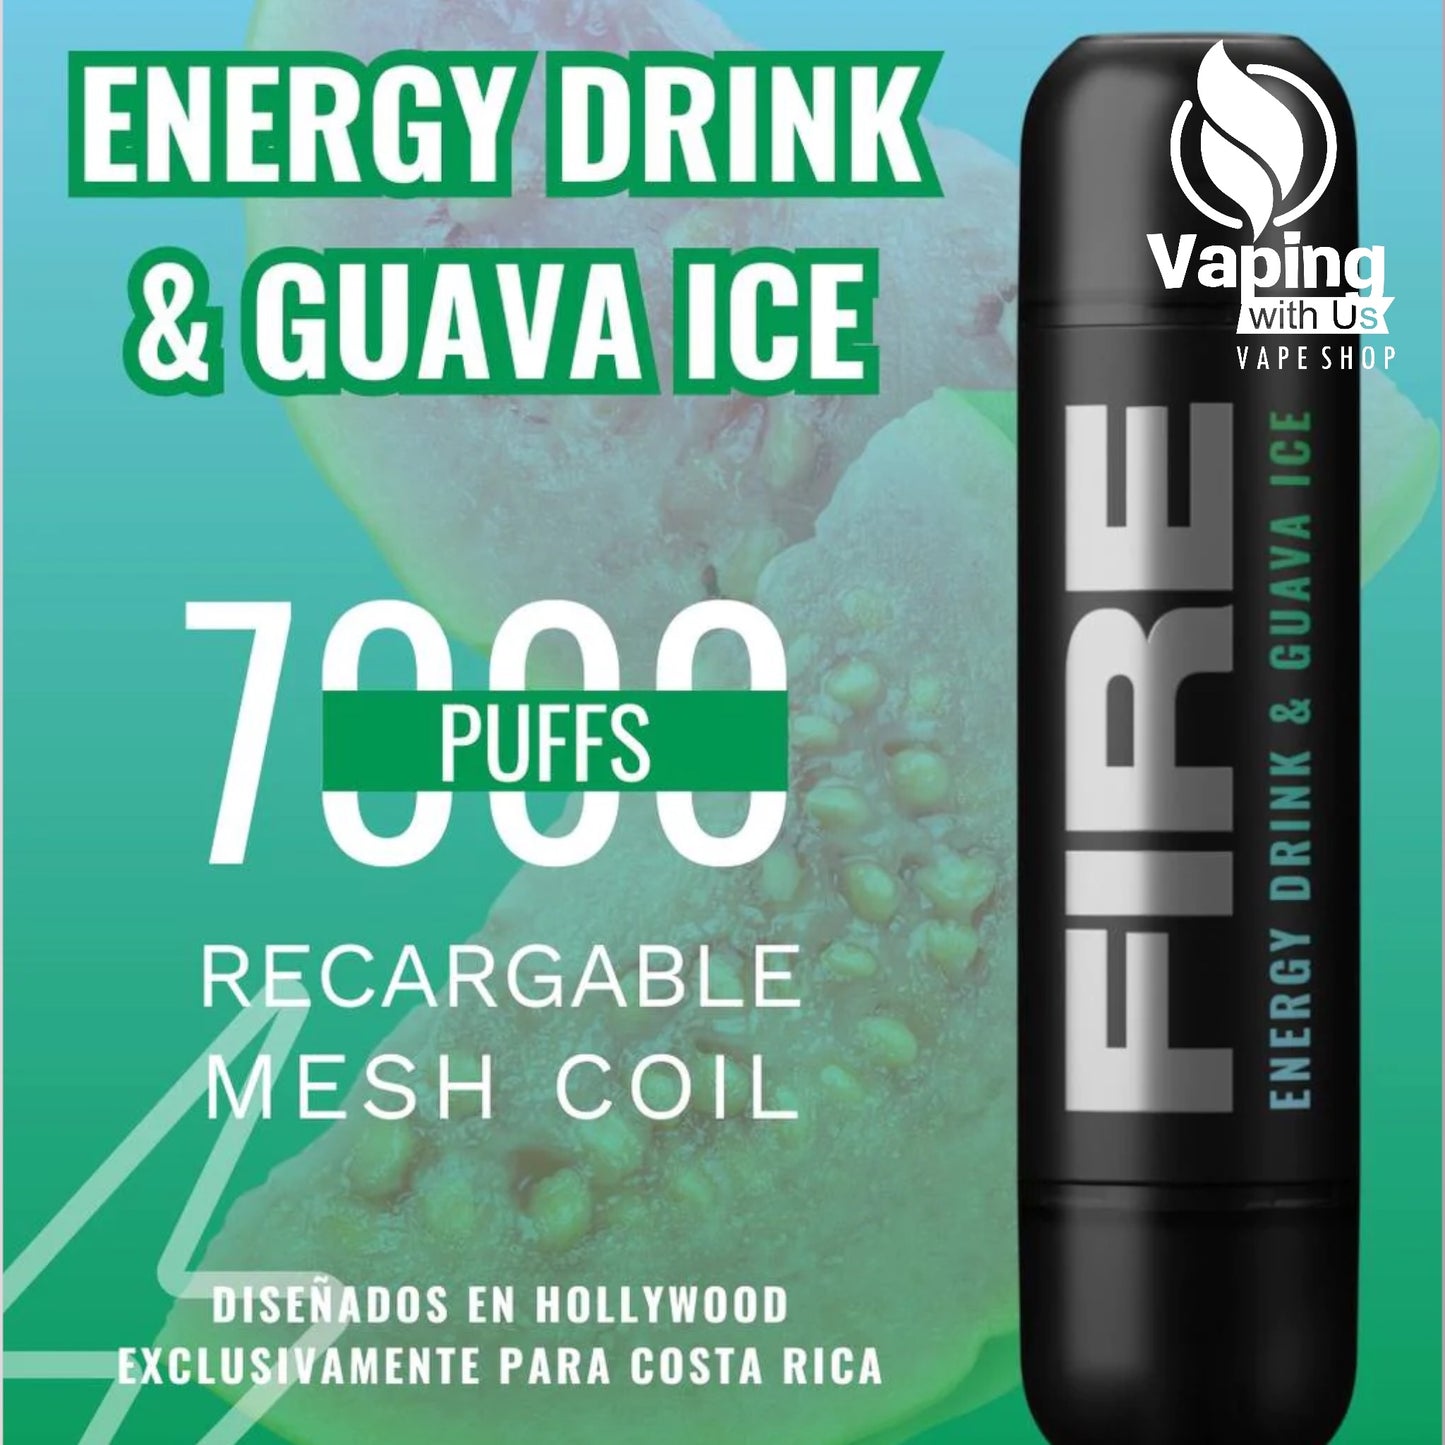 Energy Drink & Guava Ice - FIRE 7000 Puffs 5%/50mg